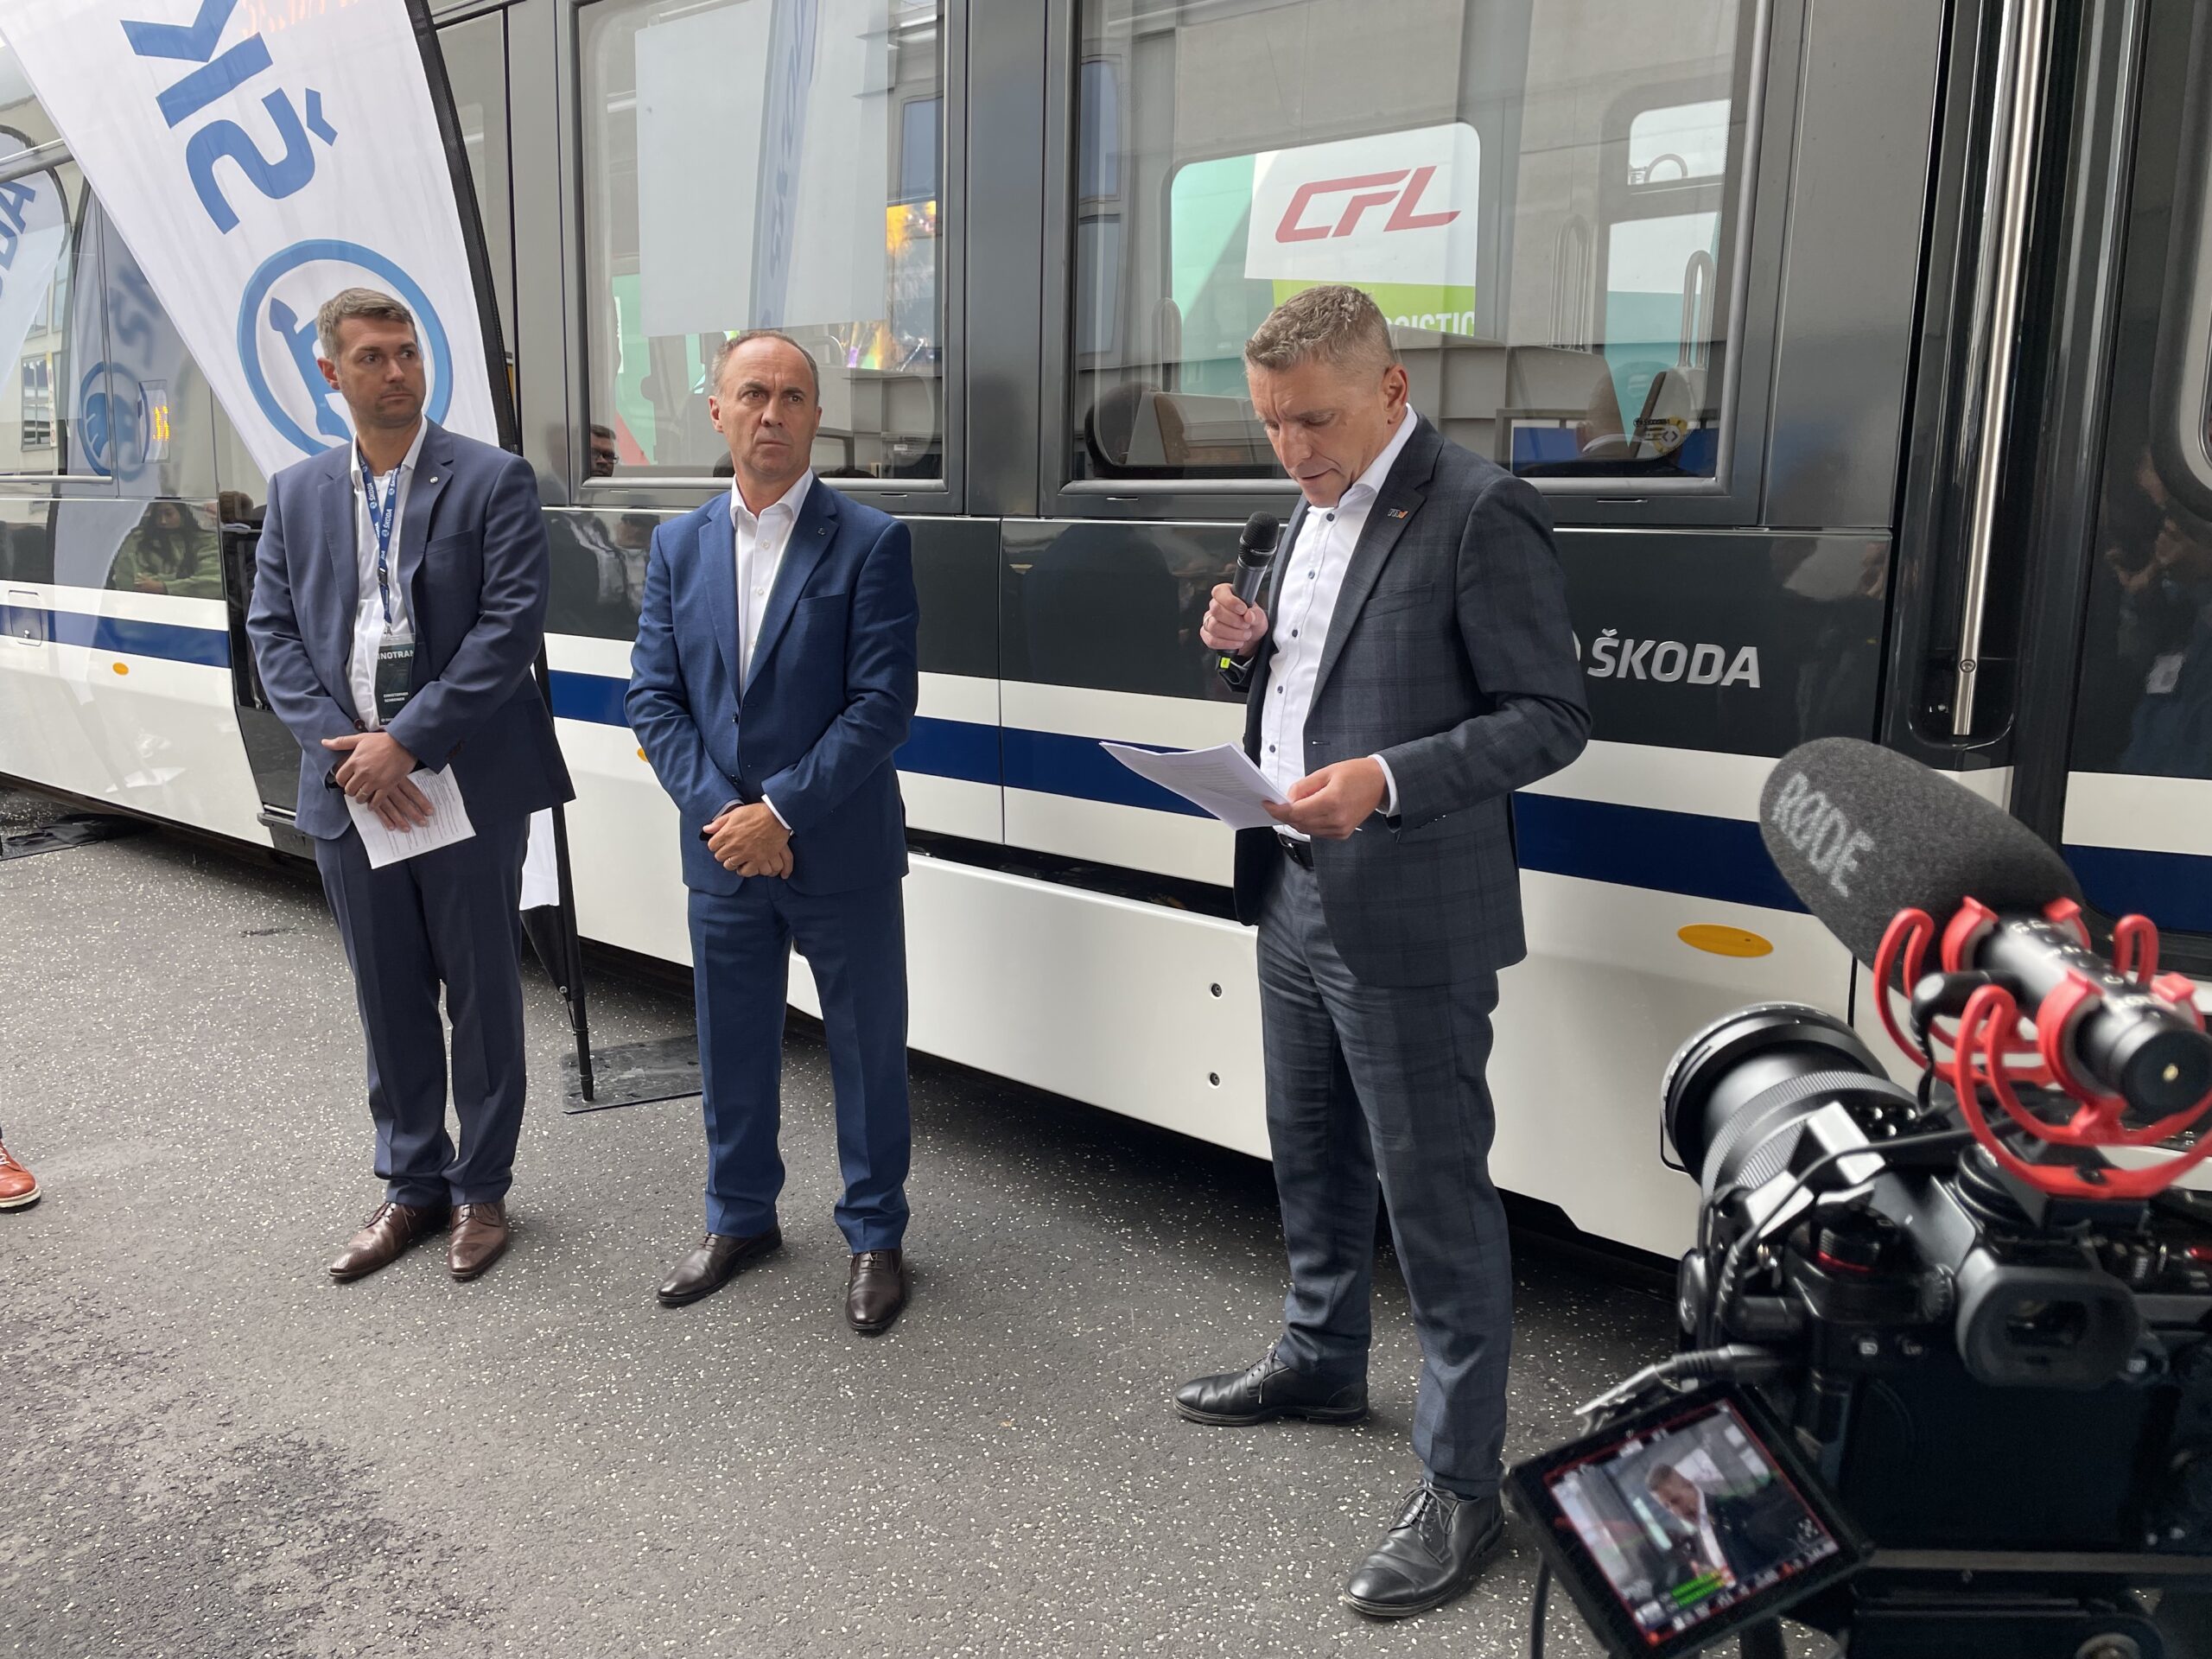 Martin in der Beek from RNV speaks at the unveiling of the Škoda 36T tram